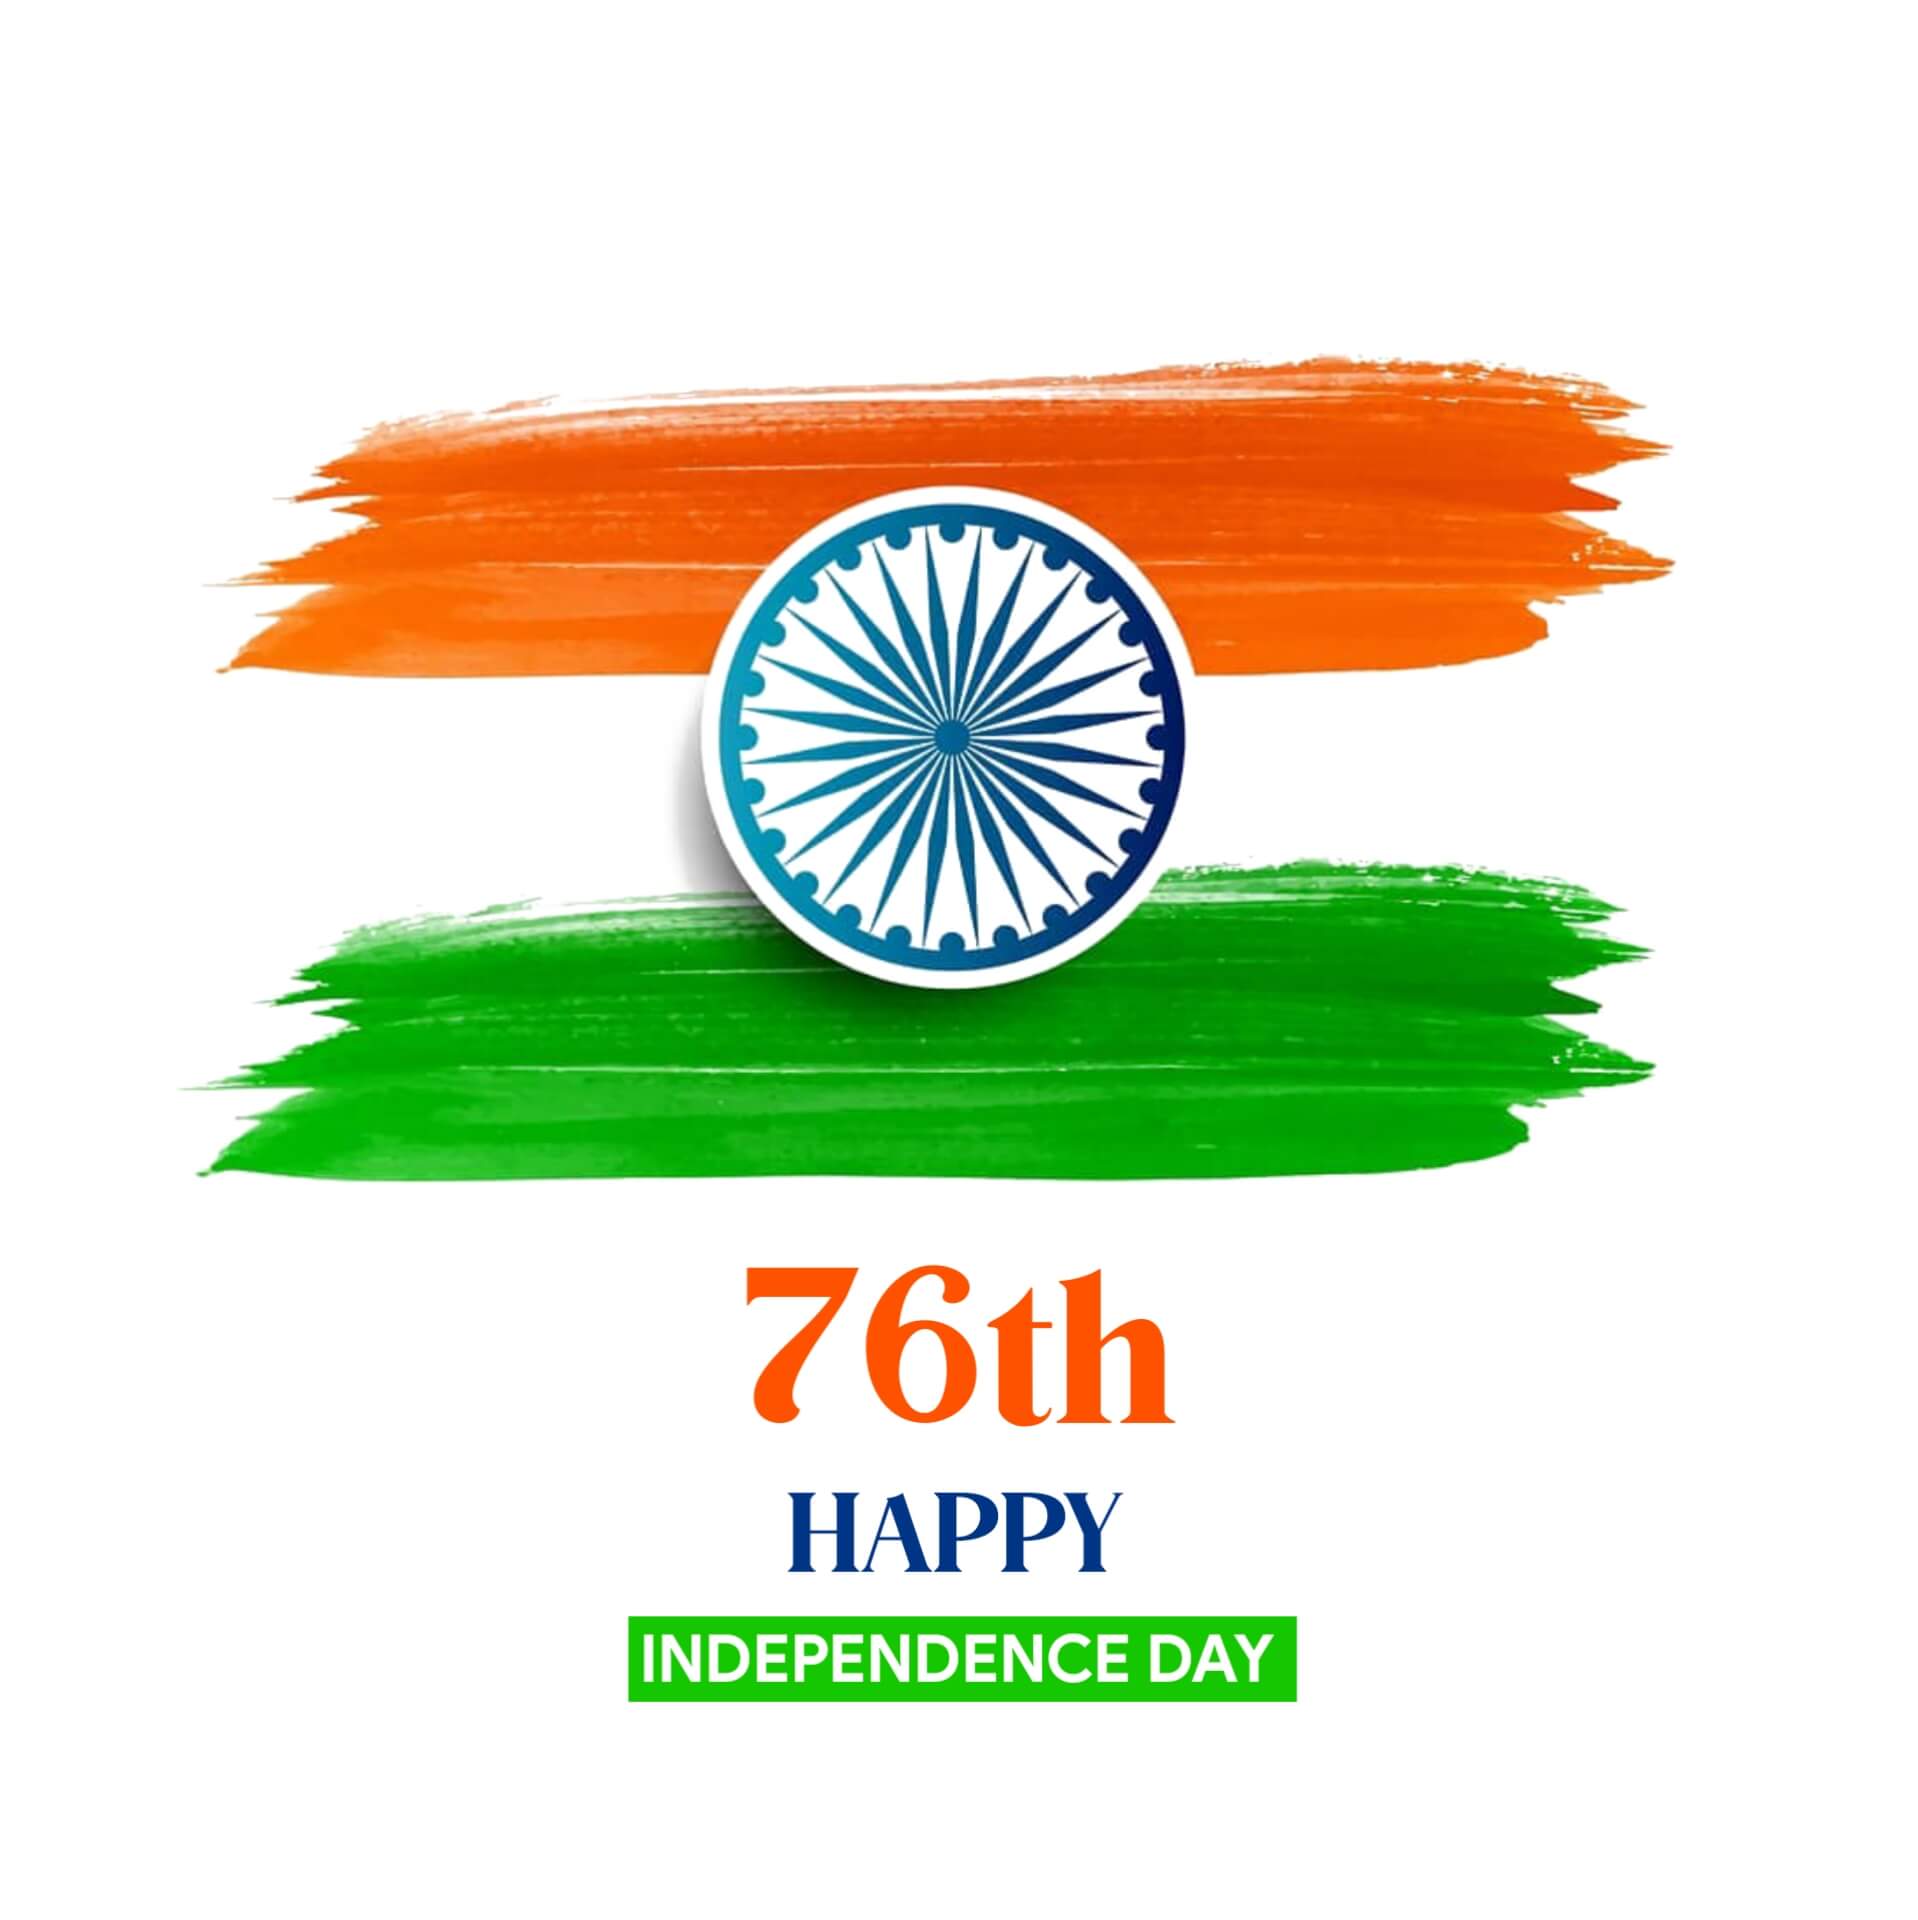 76th India Independence Day Image